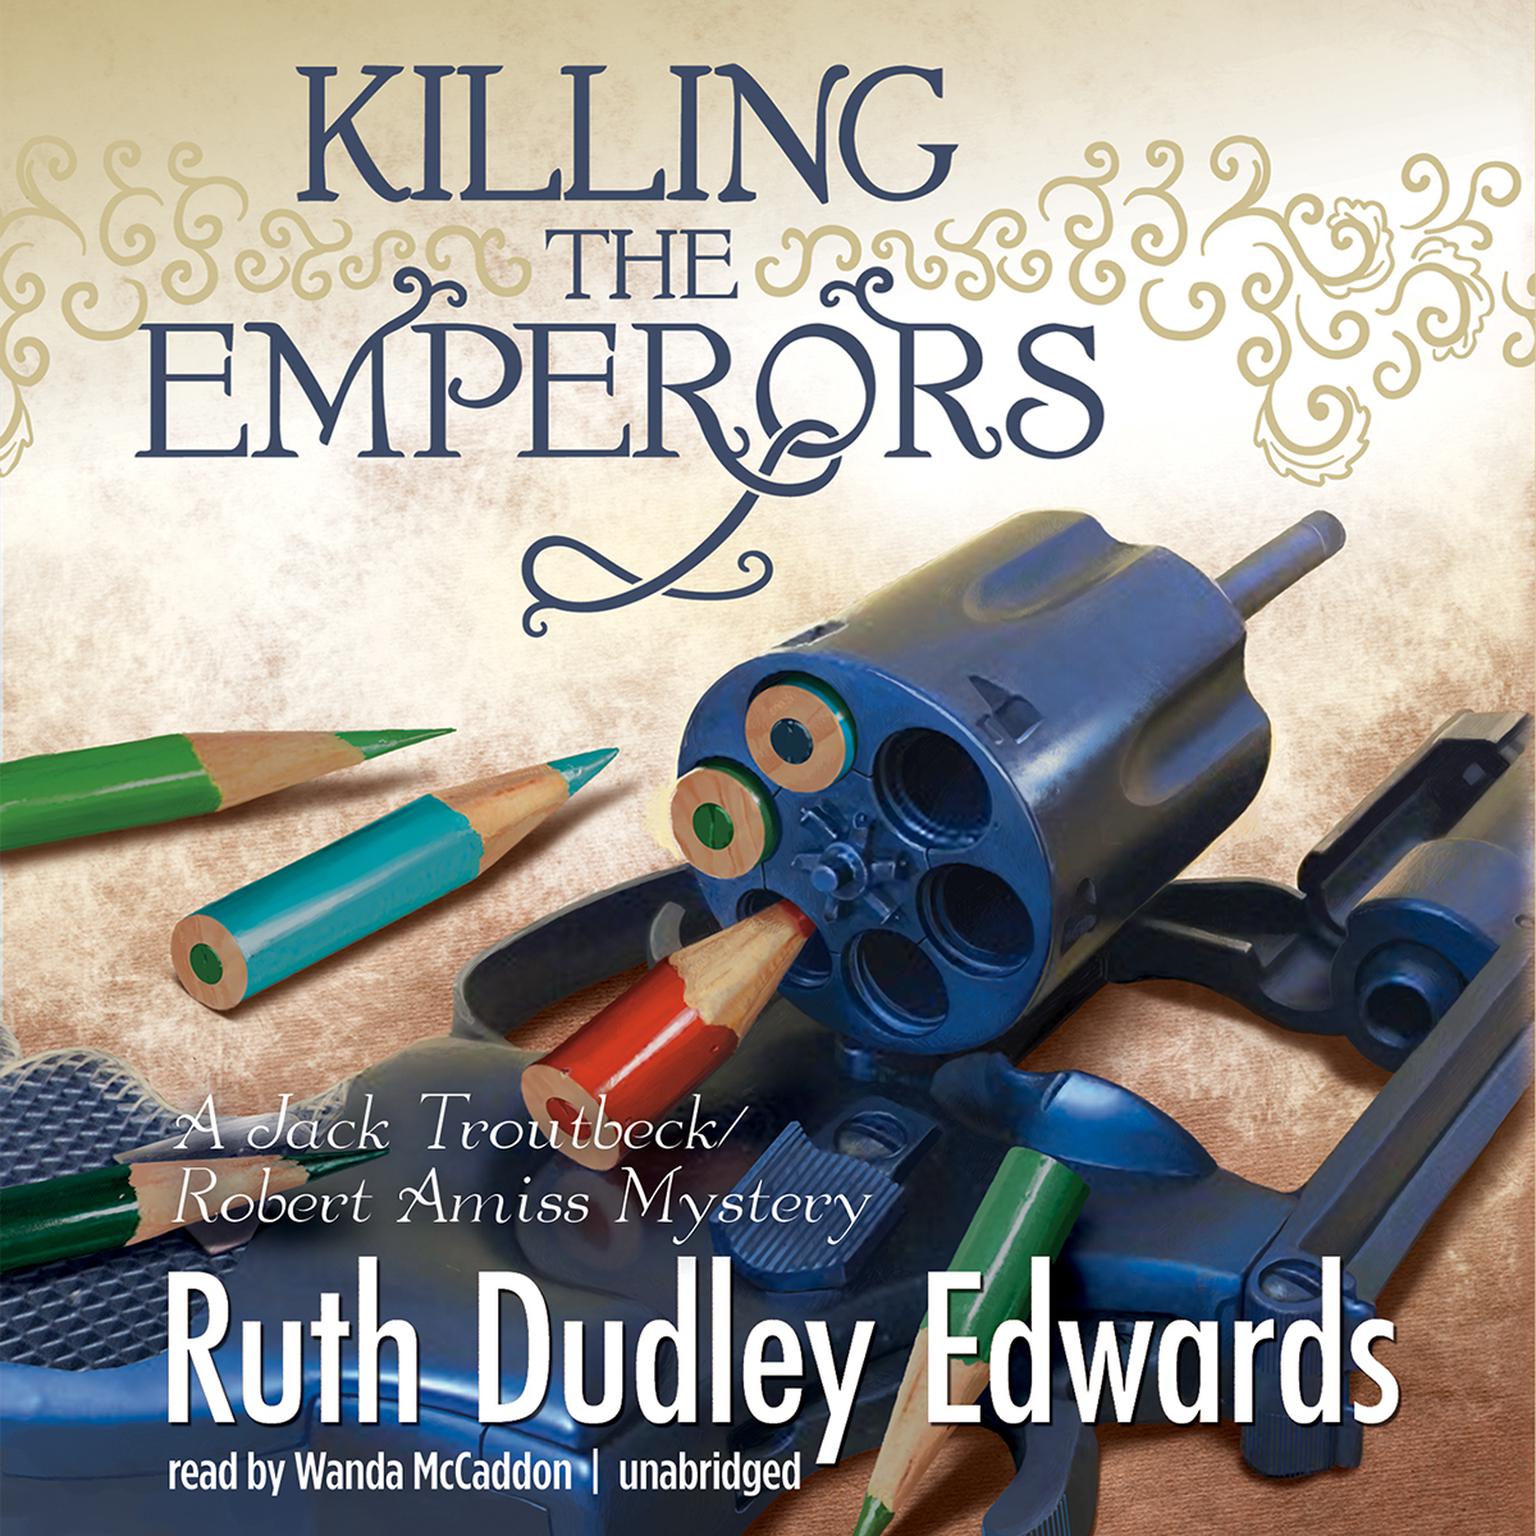 Killing the Emperors: A Jack Troutbeck / Robert Amiss Mystery Audiobook, by Ruth Dudley Edwards